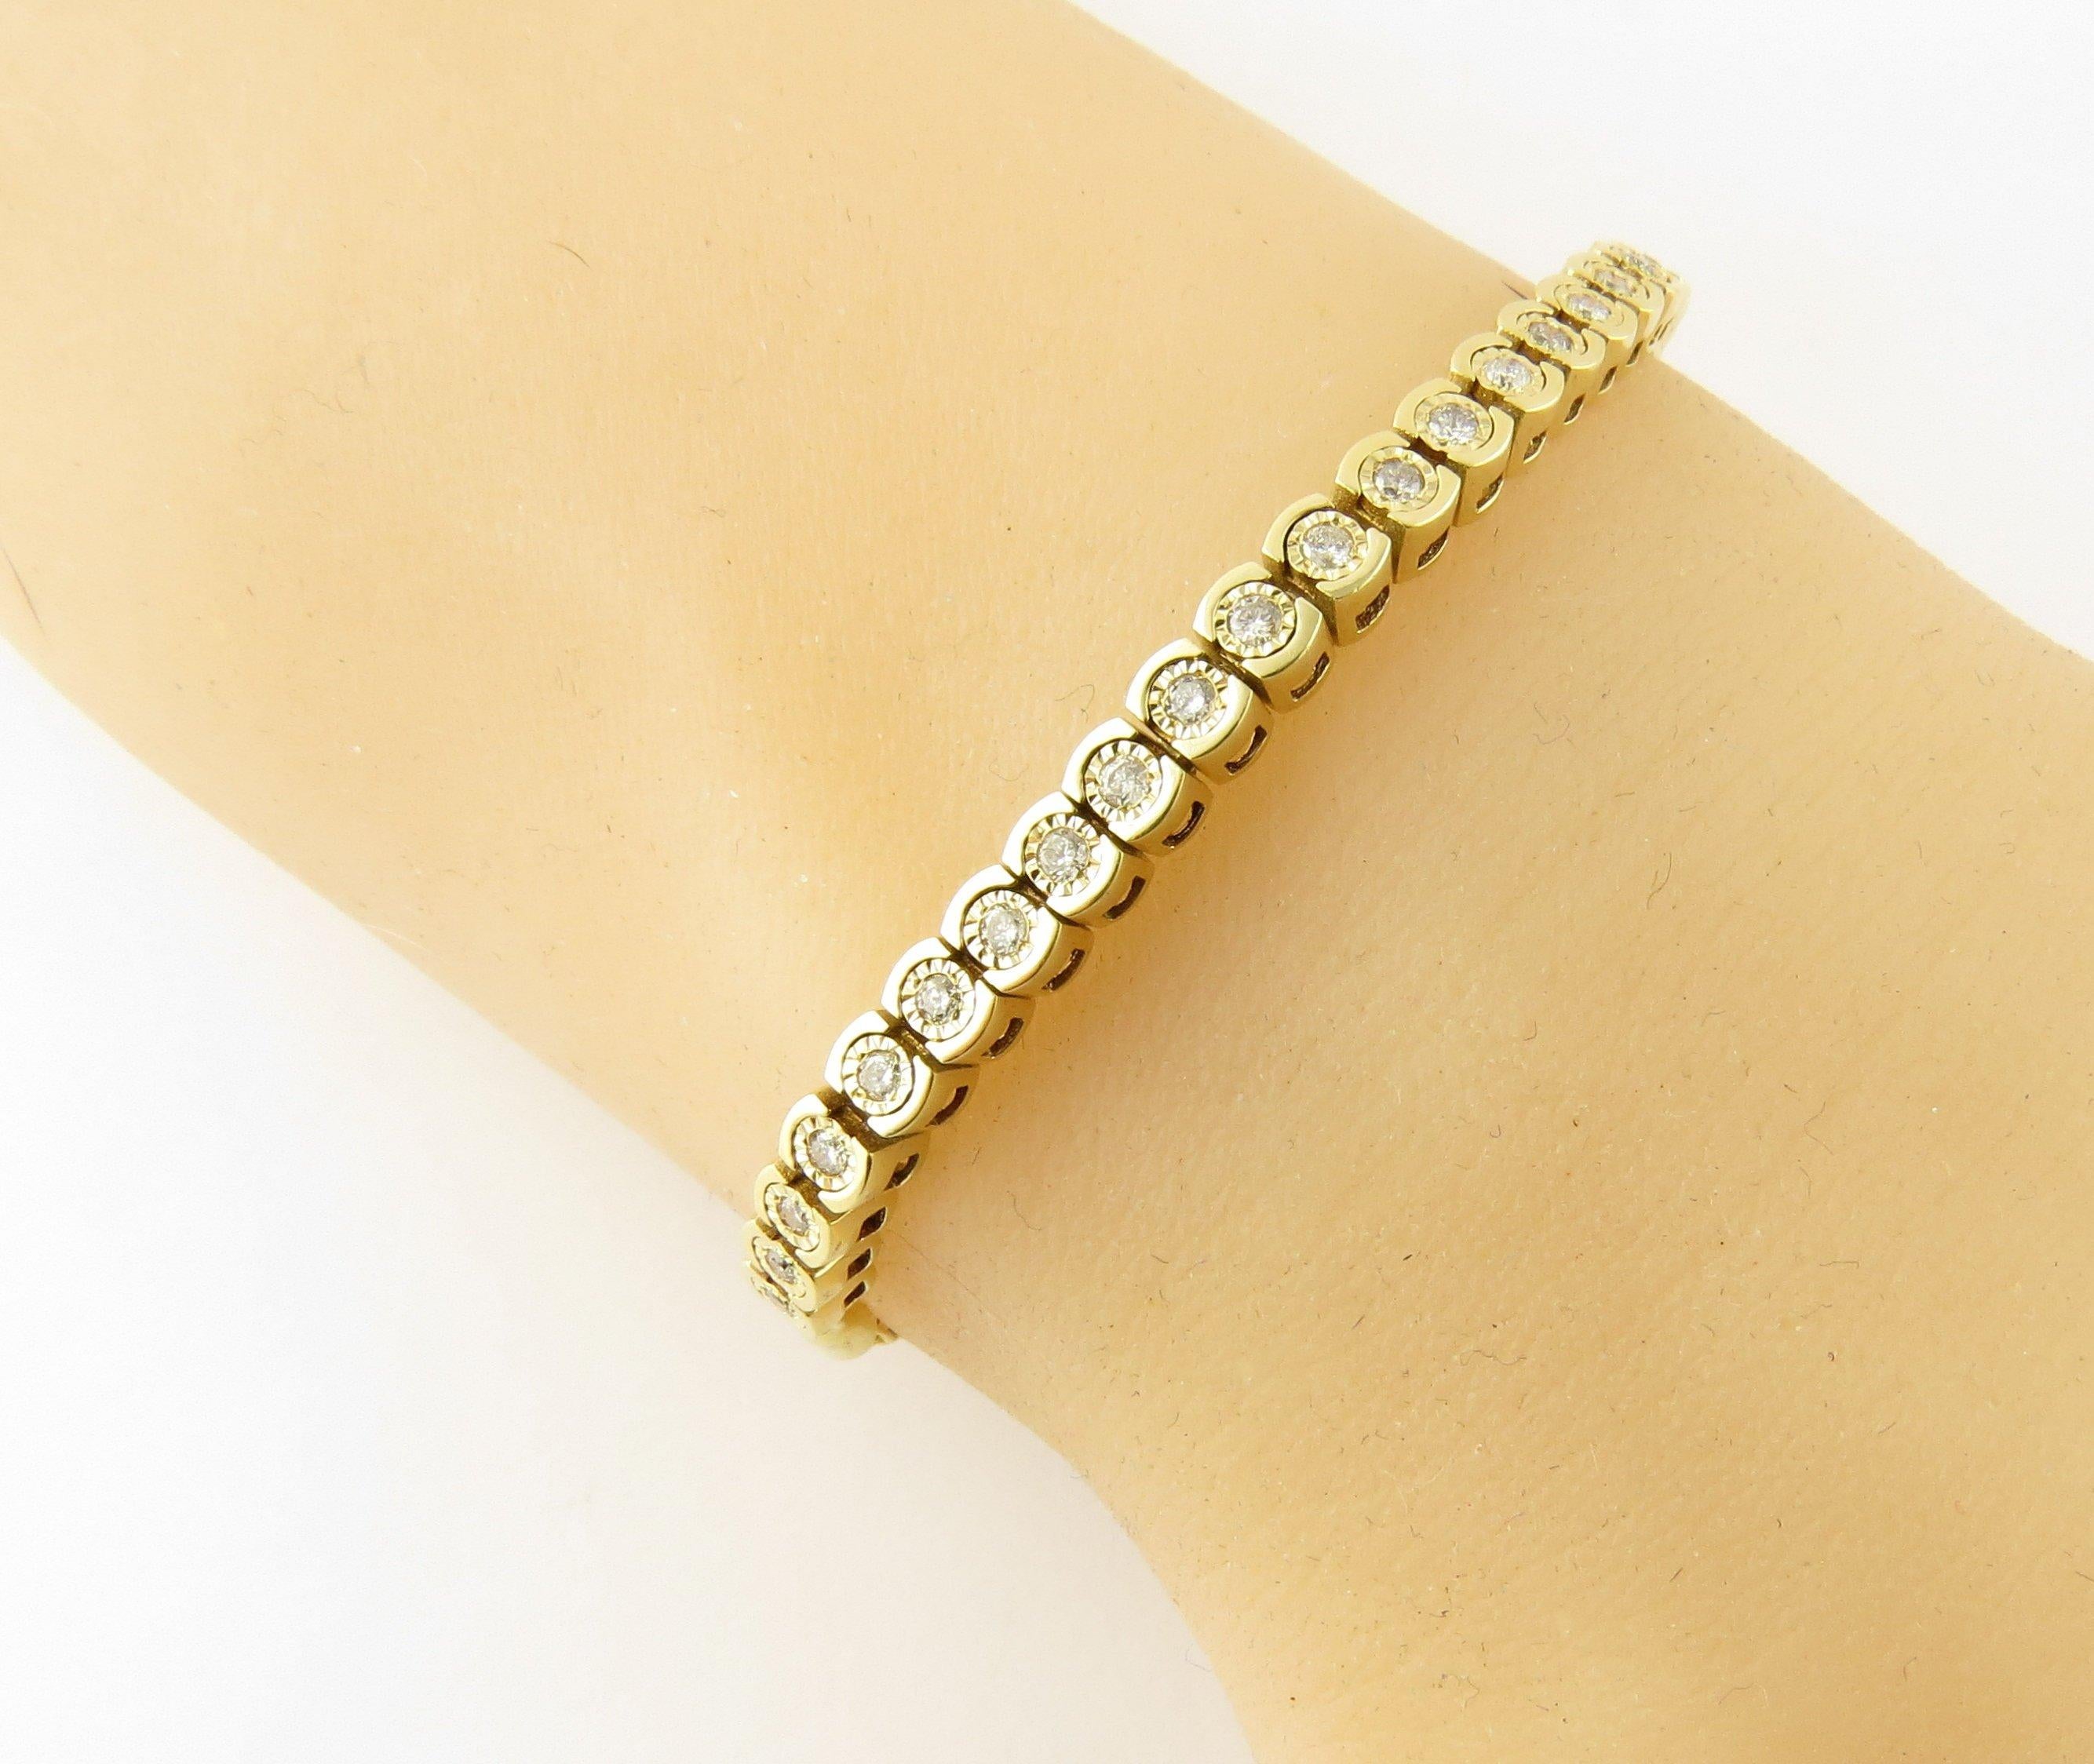 Vintage 10 Karat Yellow Gold Diamond Bracelet- 
This stunning toggle bracelet features 26 round brilliant cut diamonds set in classic 10K yellow gold. 
Approximate total diamond weight: .78 ct. 
Diamond color: H-I 
Diamond clarity: SI1-I1 
Size: